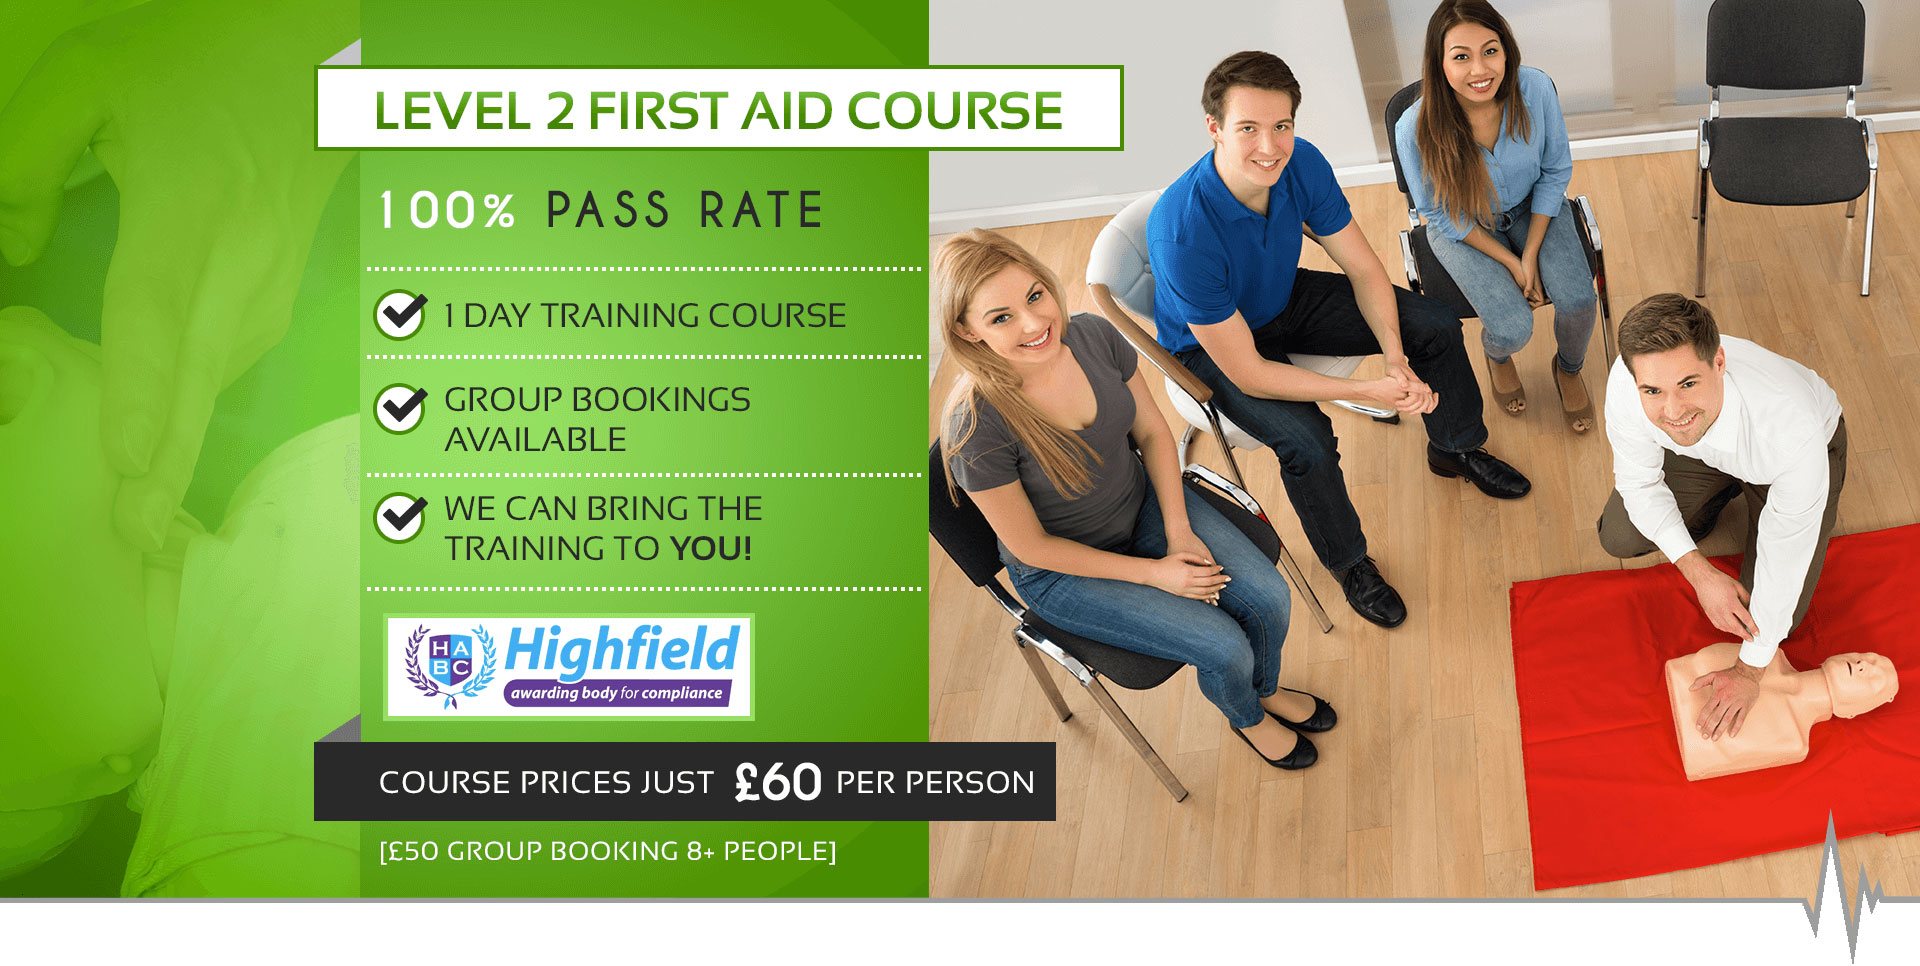 Our First Aid Courses